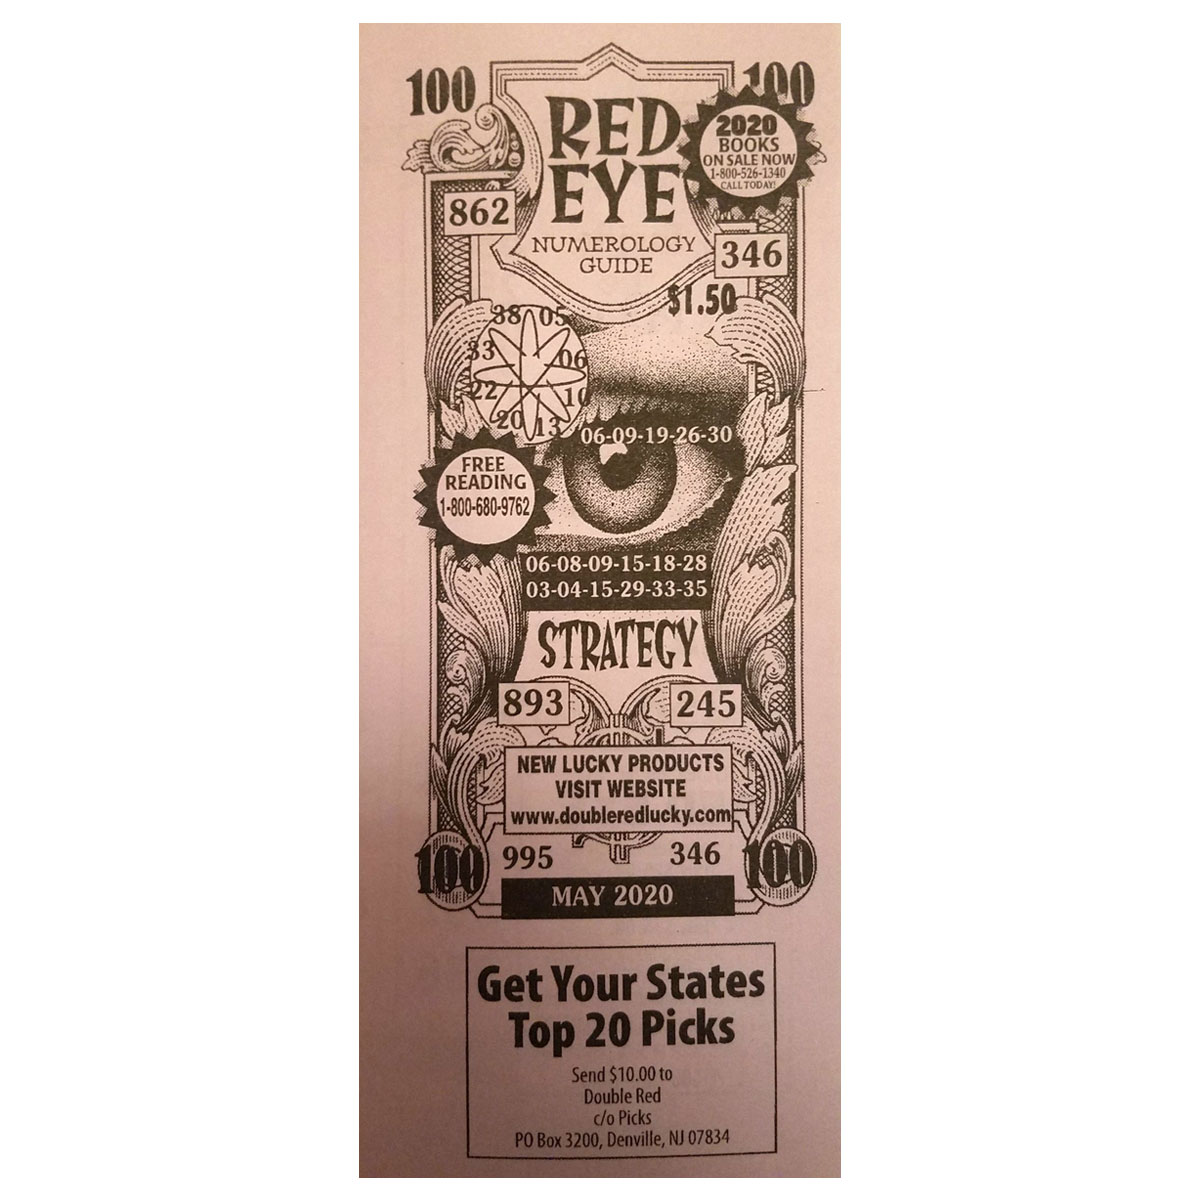 Red Eye Numerology Guide